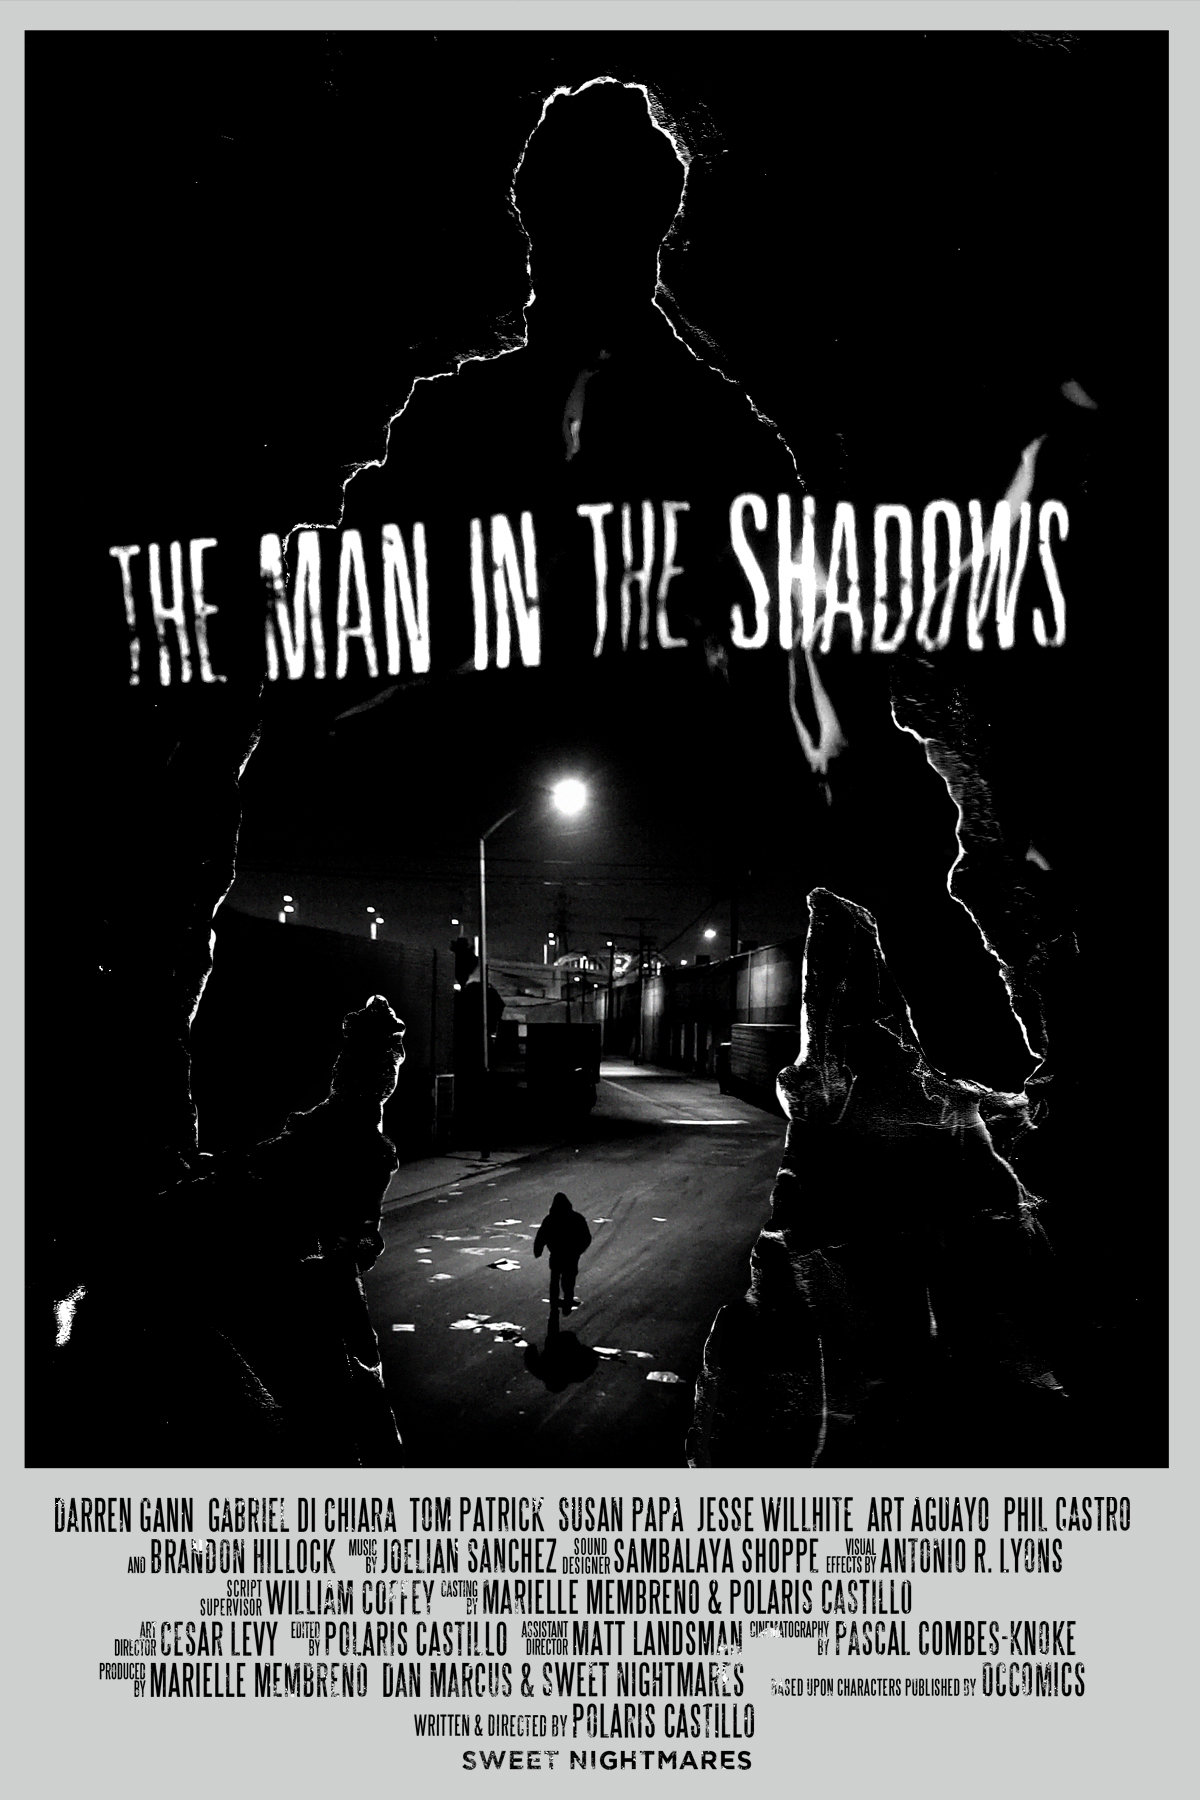 The Man in the Shadows